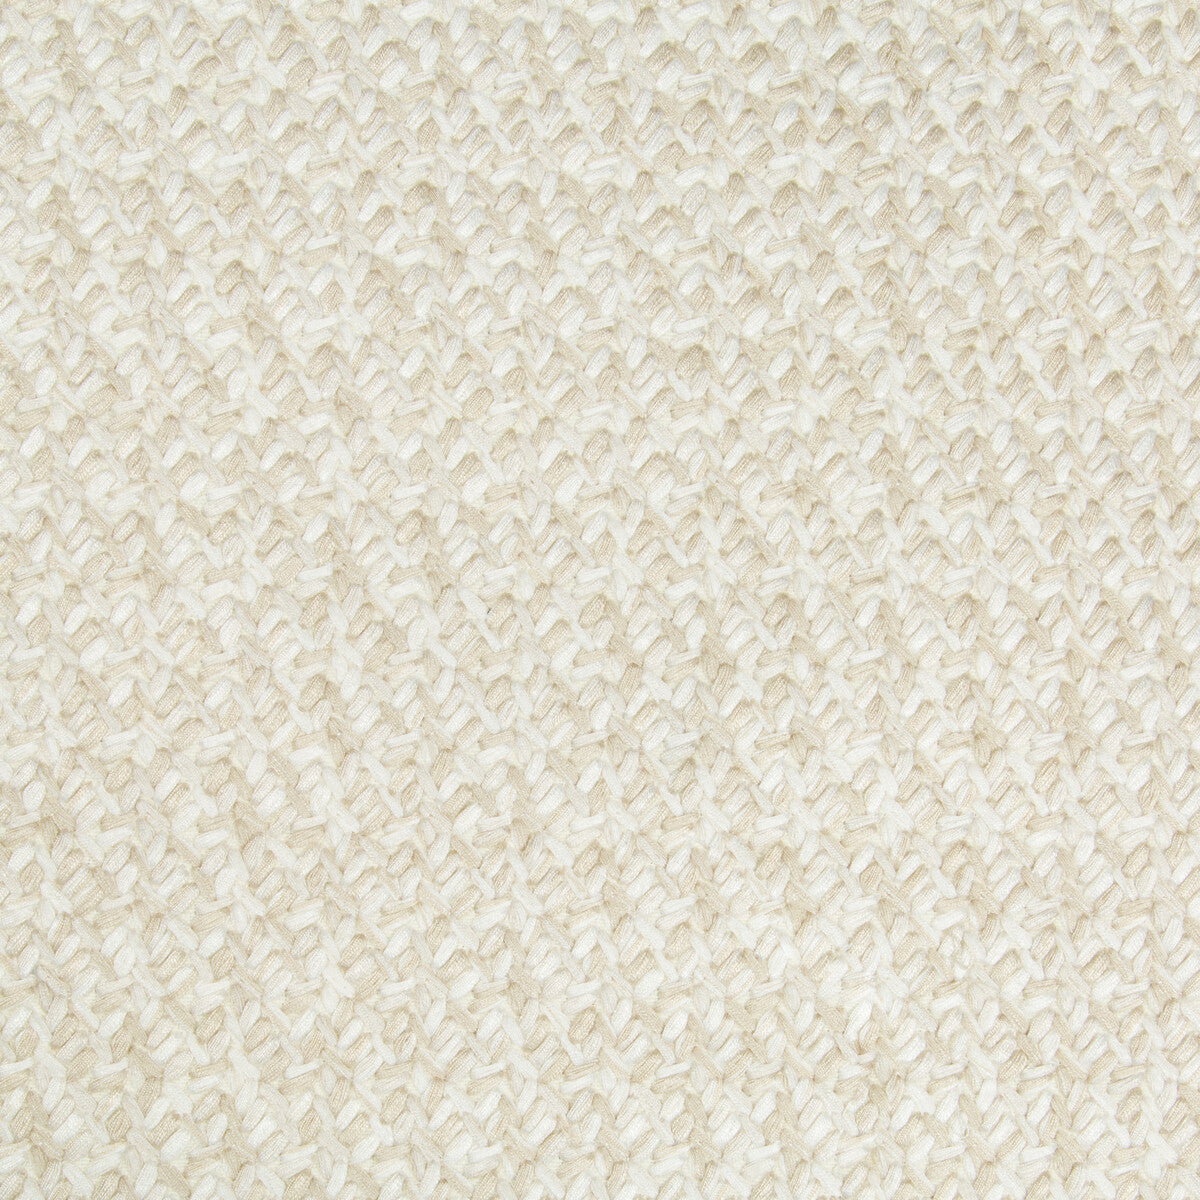 Lacing fabric in alabaster color - pattern 34921.116.0 - by Kravet Couture in the Modern Tailor collection